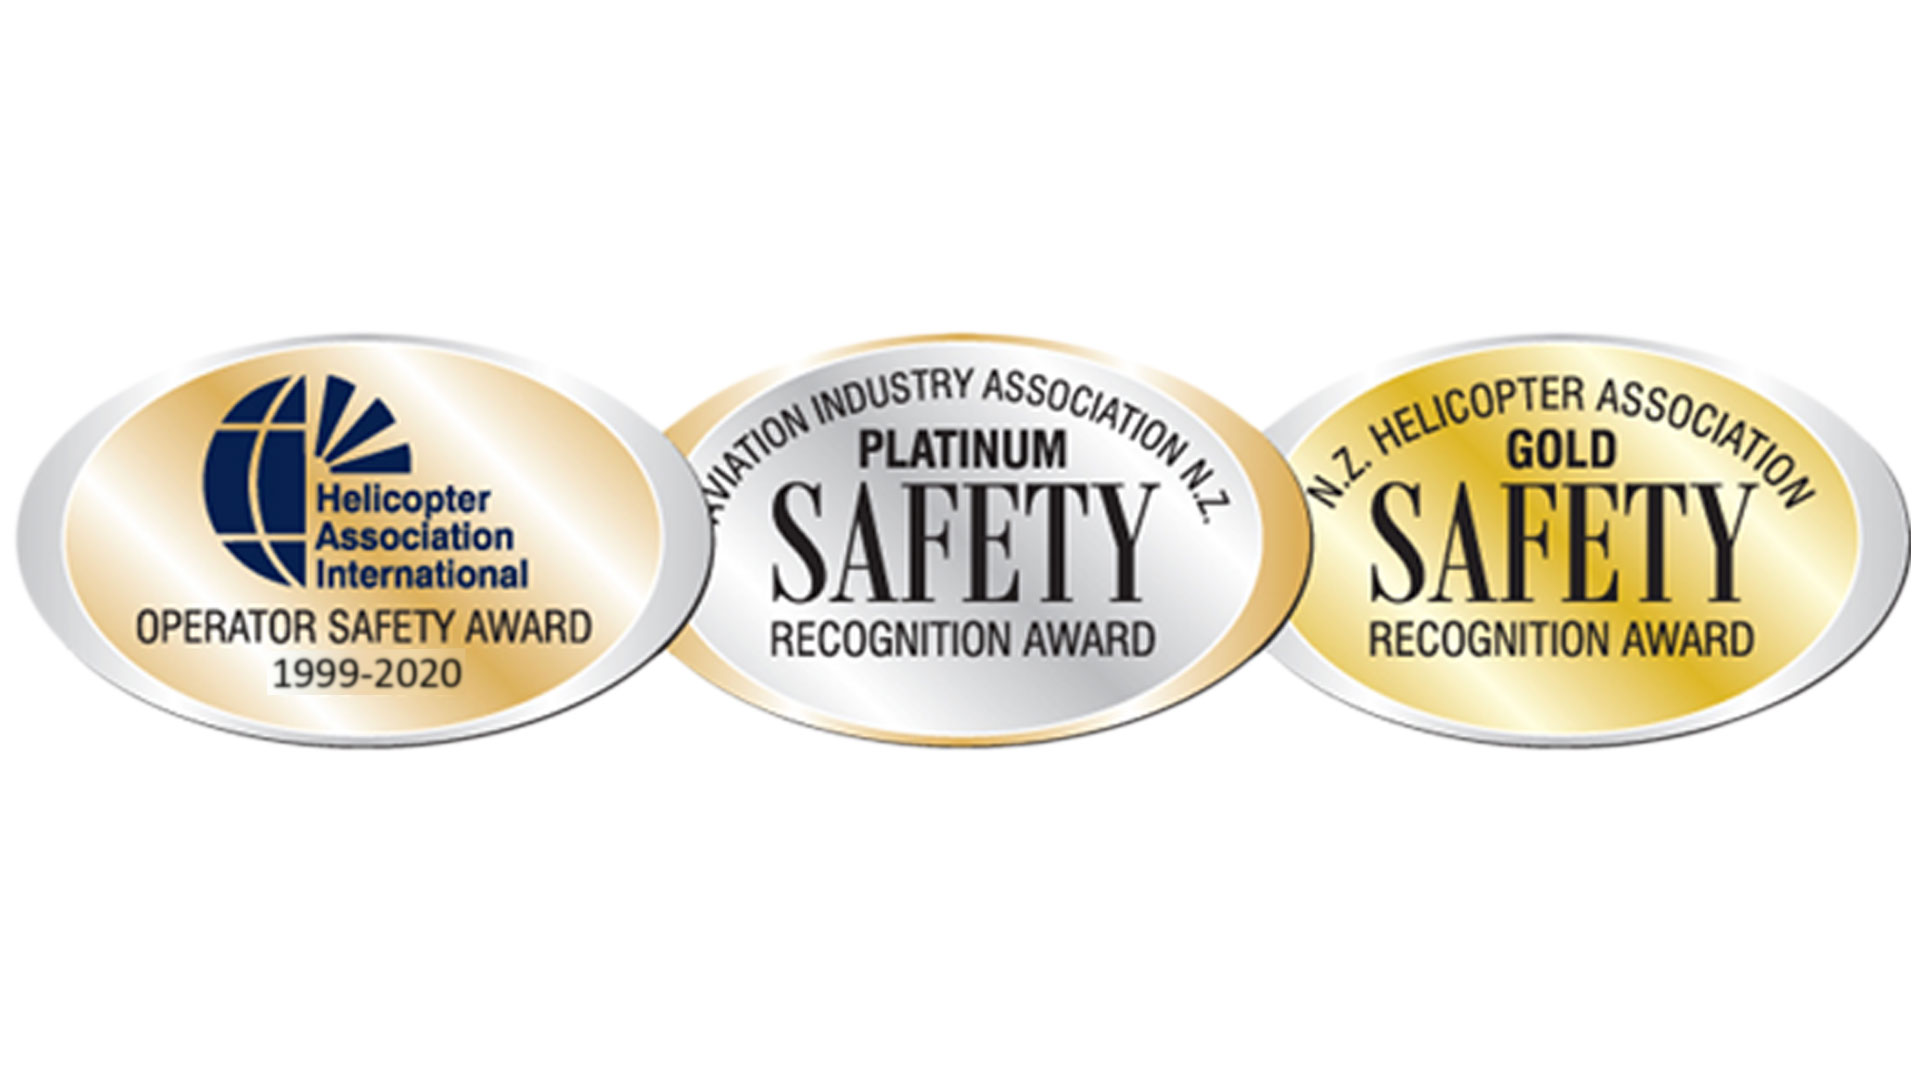 Helicopter Association safety recognition awards